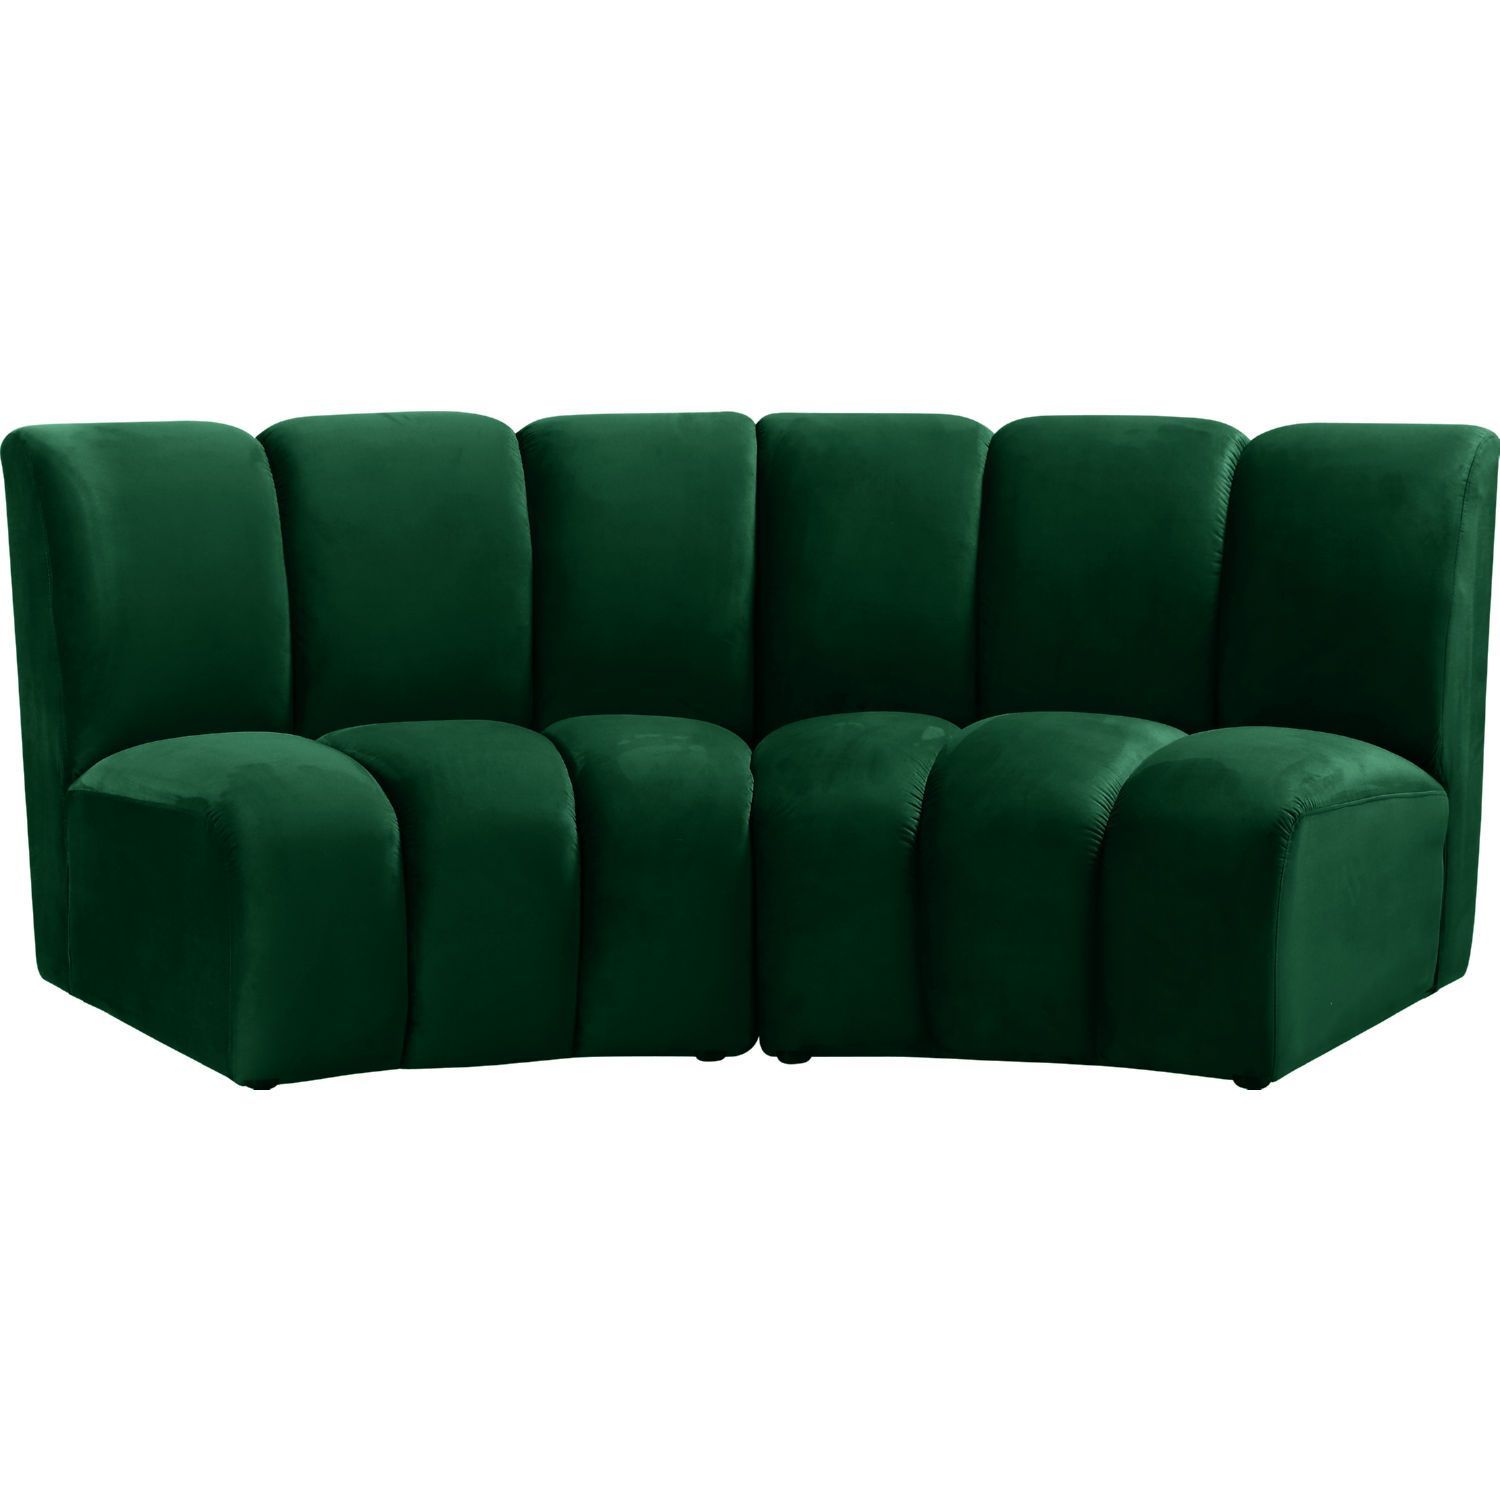 Meridian Furniture 638green 5pc Infinity 5 Piece Modular Sectional Sofa Intended For Green Velvet Modular Sectionals (View 2 of 20)